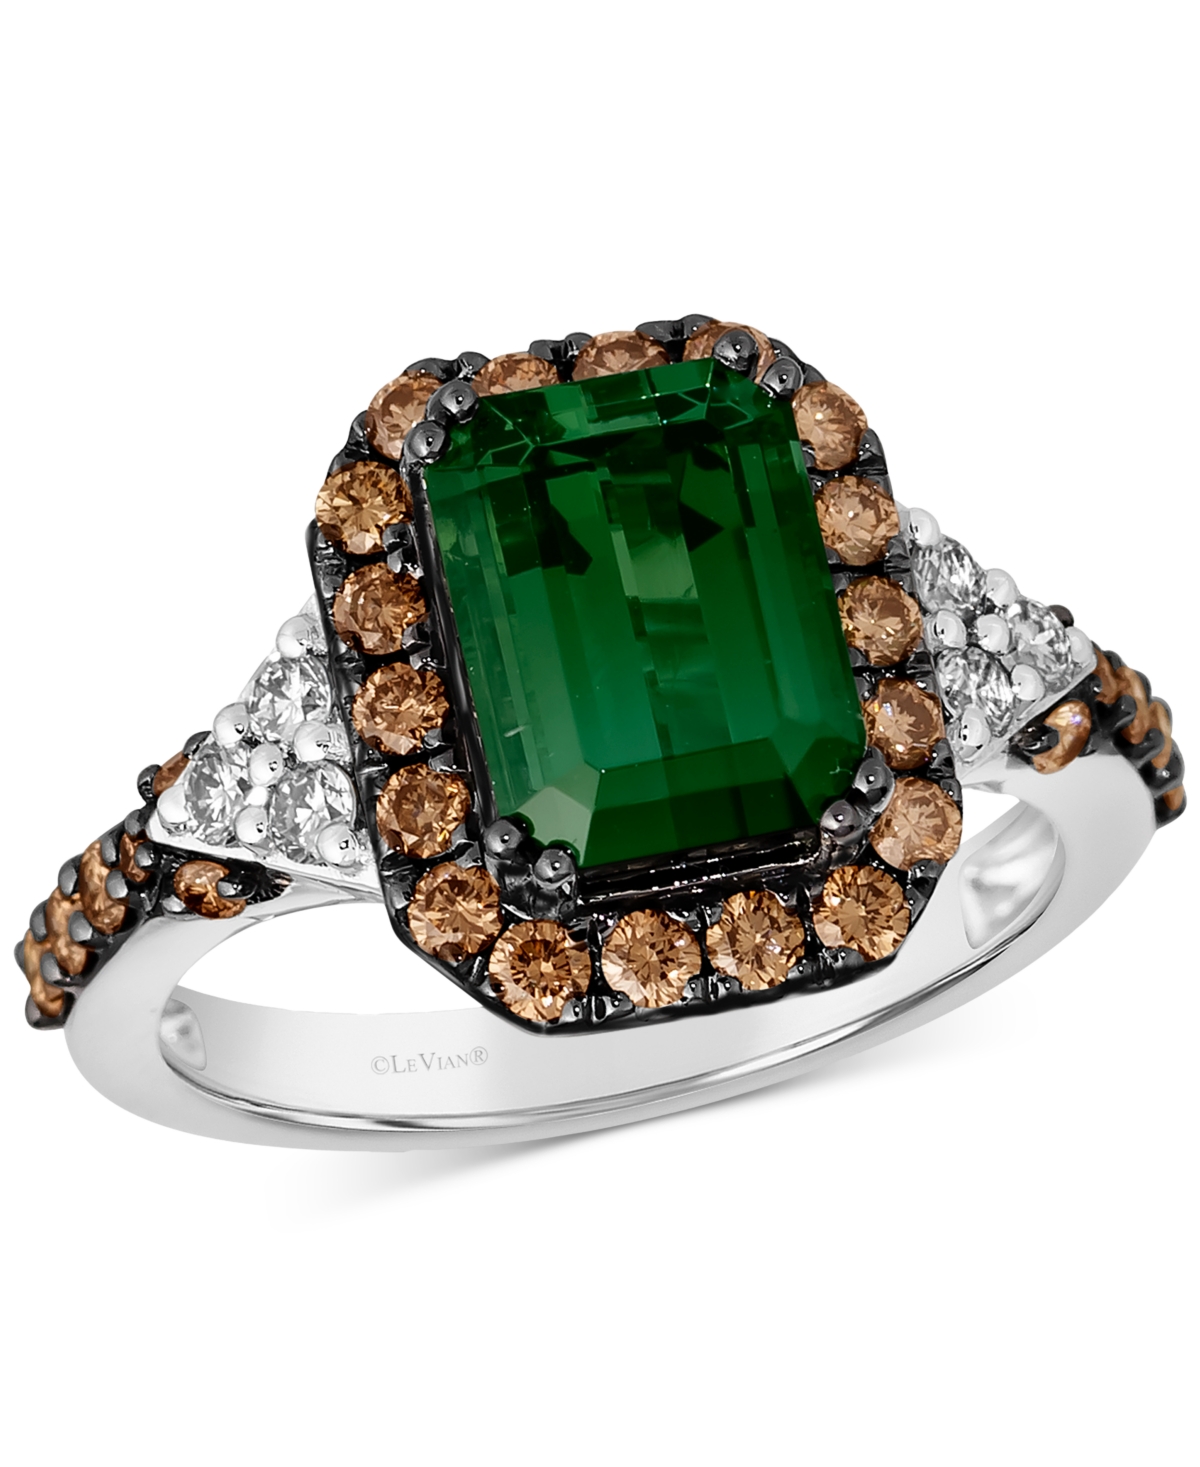 Le Vian Couture Hunters Green Tourmaline (2-1/4 ct. t.w.), Chocolate Diamonds (5/8 ct. t.w.) & Nude Diamonds (1/5 ct. t.w.) Square Halo Ring in Platinum